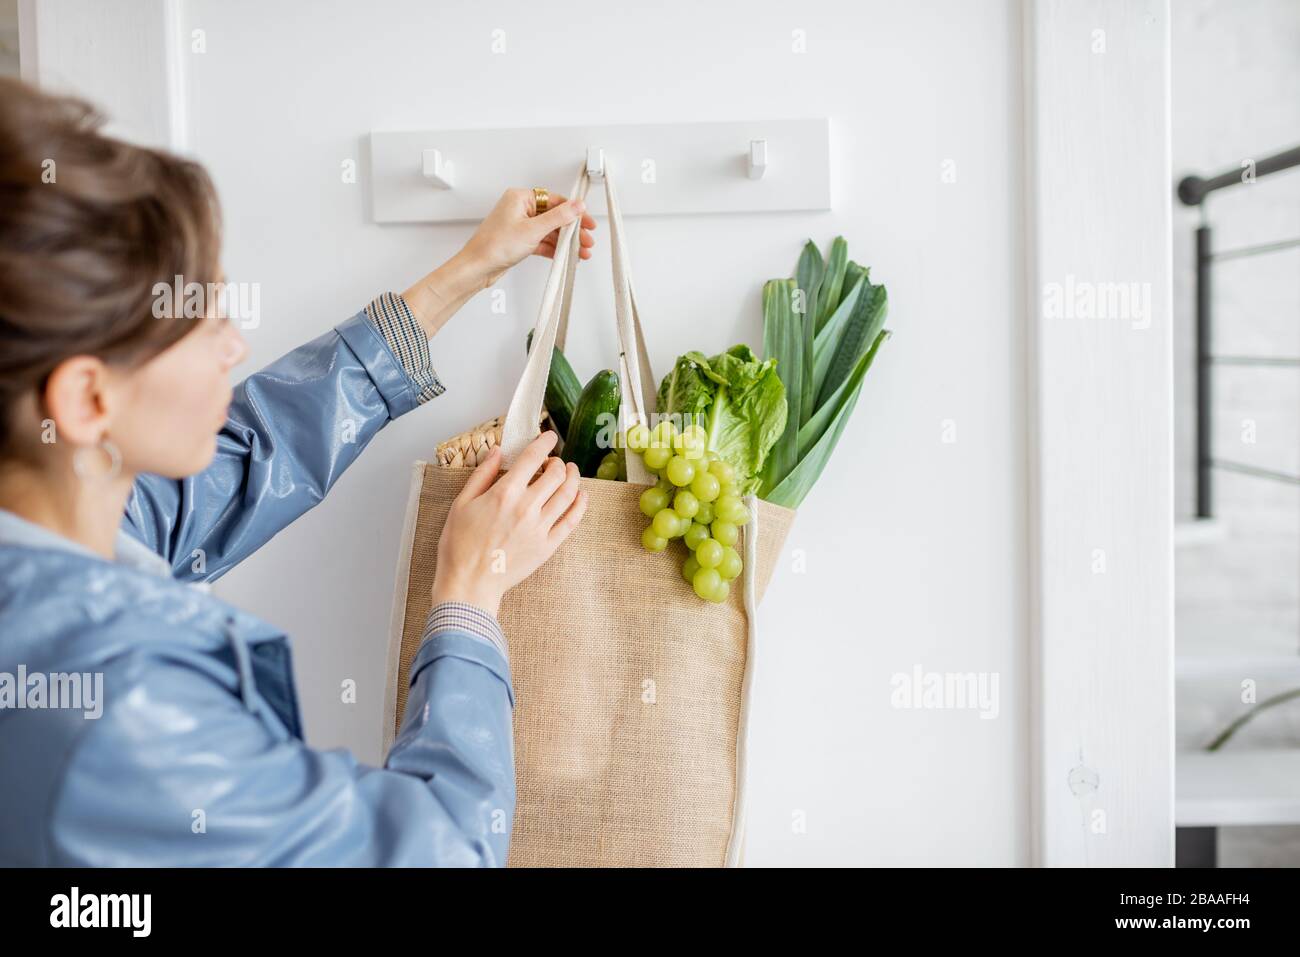 Woman hanging bag full of fresh vegetables and greens while coming home after the shopping Stock Photo